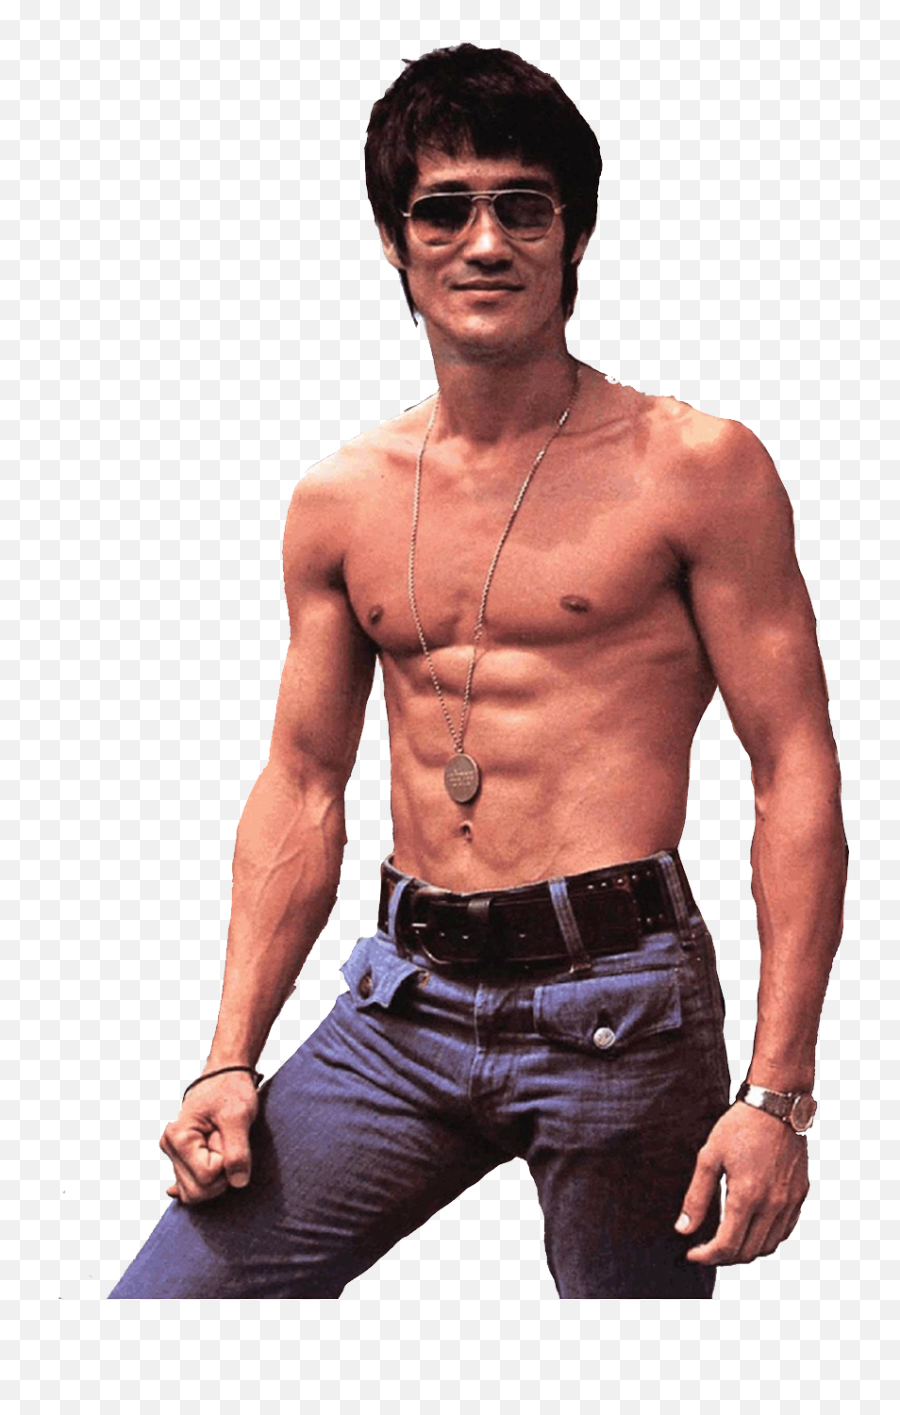 Png Images Pngs Bruce Lee Martial - Bruce Lee Images Hd Download Emoji,Emotions Can Be The Enemy Bruce Lee